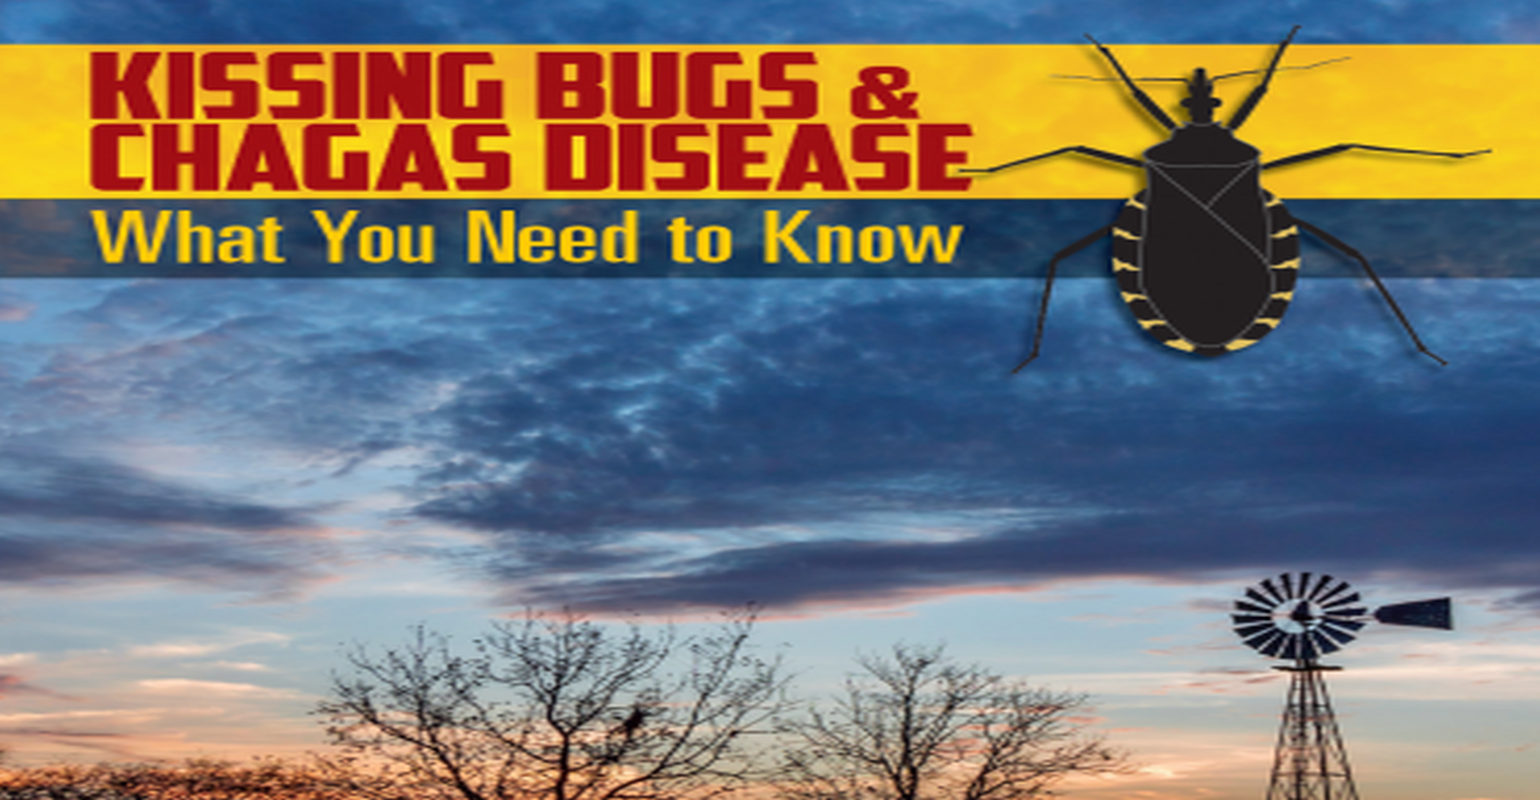 New 'Kissing Bug' Guide Published to Strengthen the Fight Against Chagas Disease